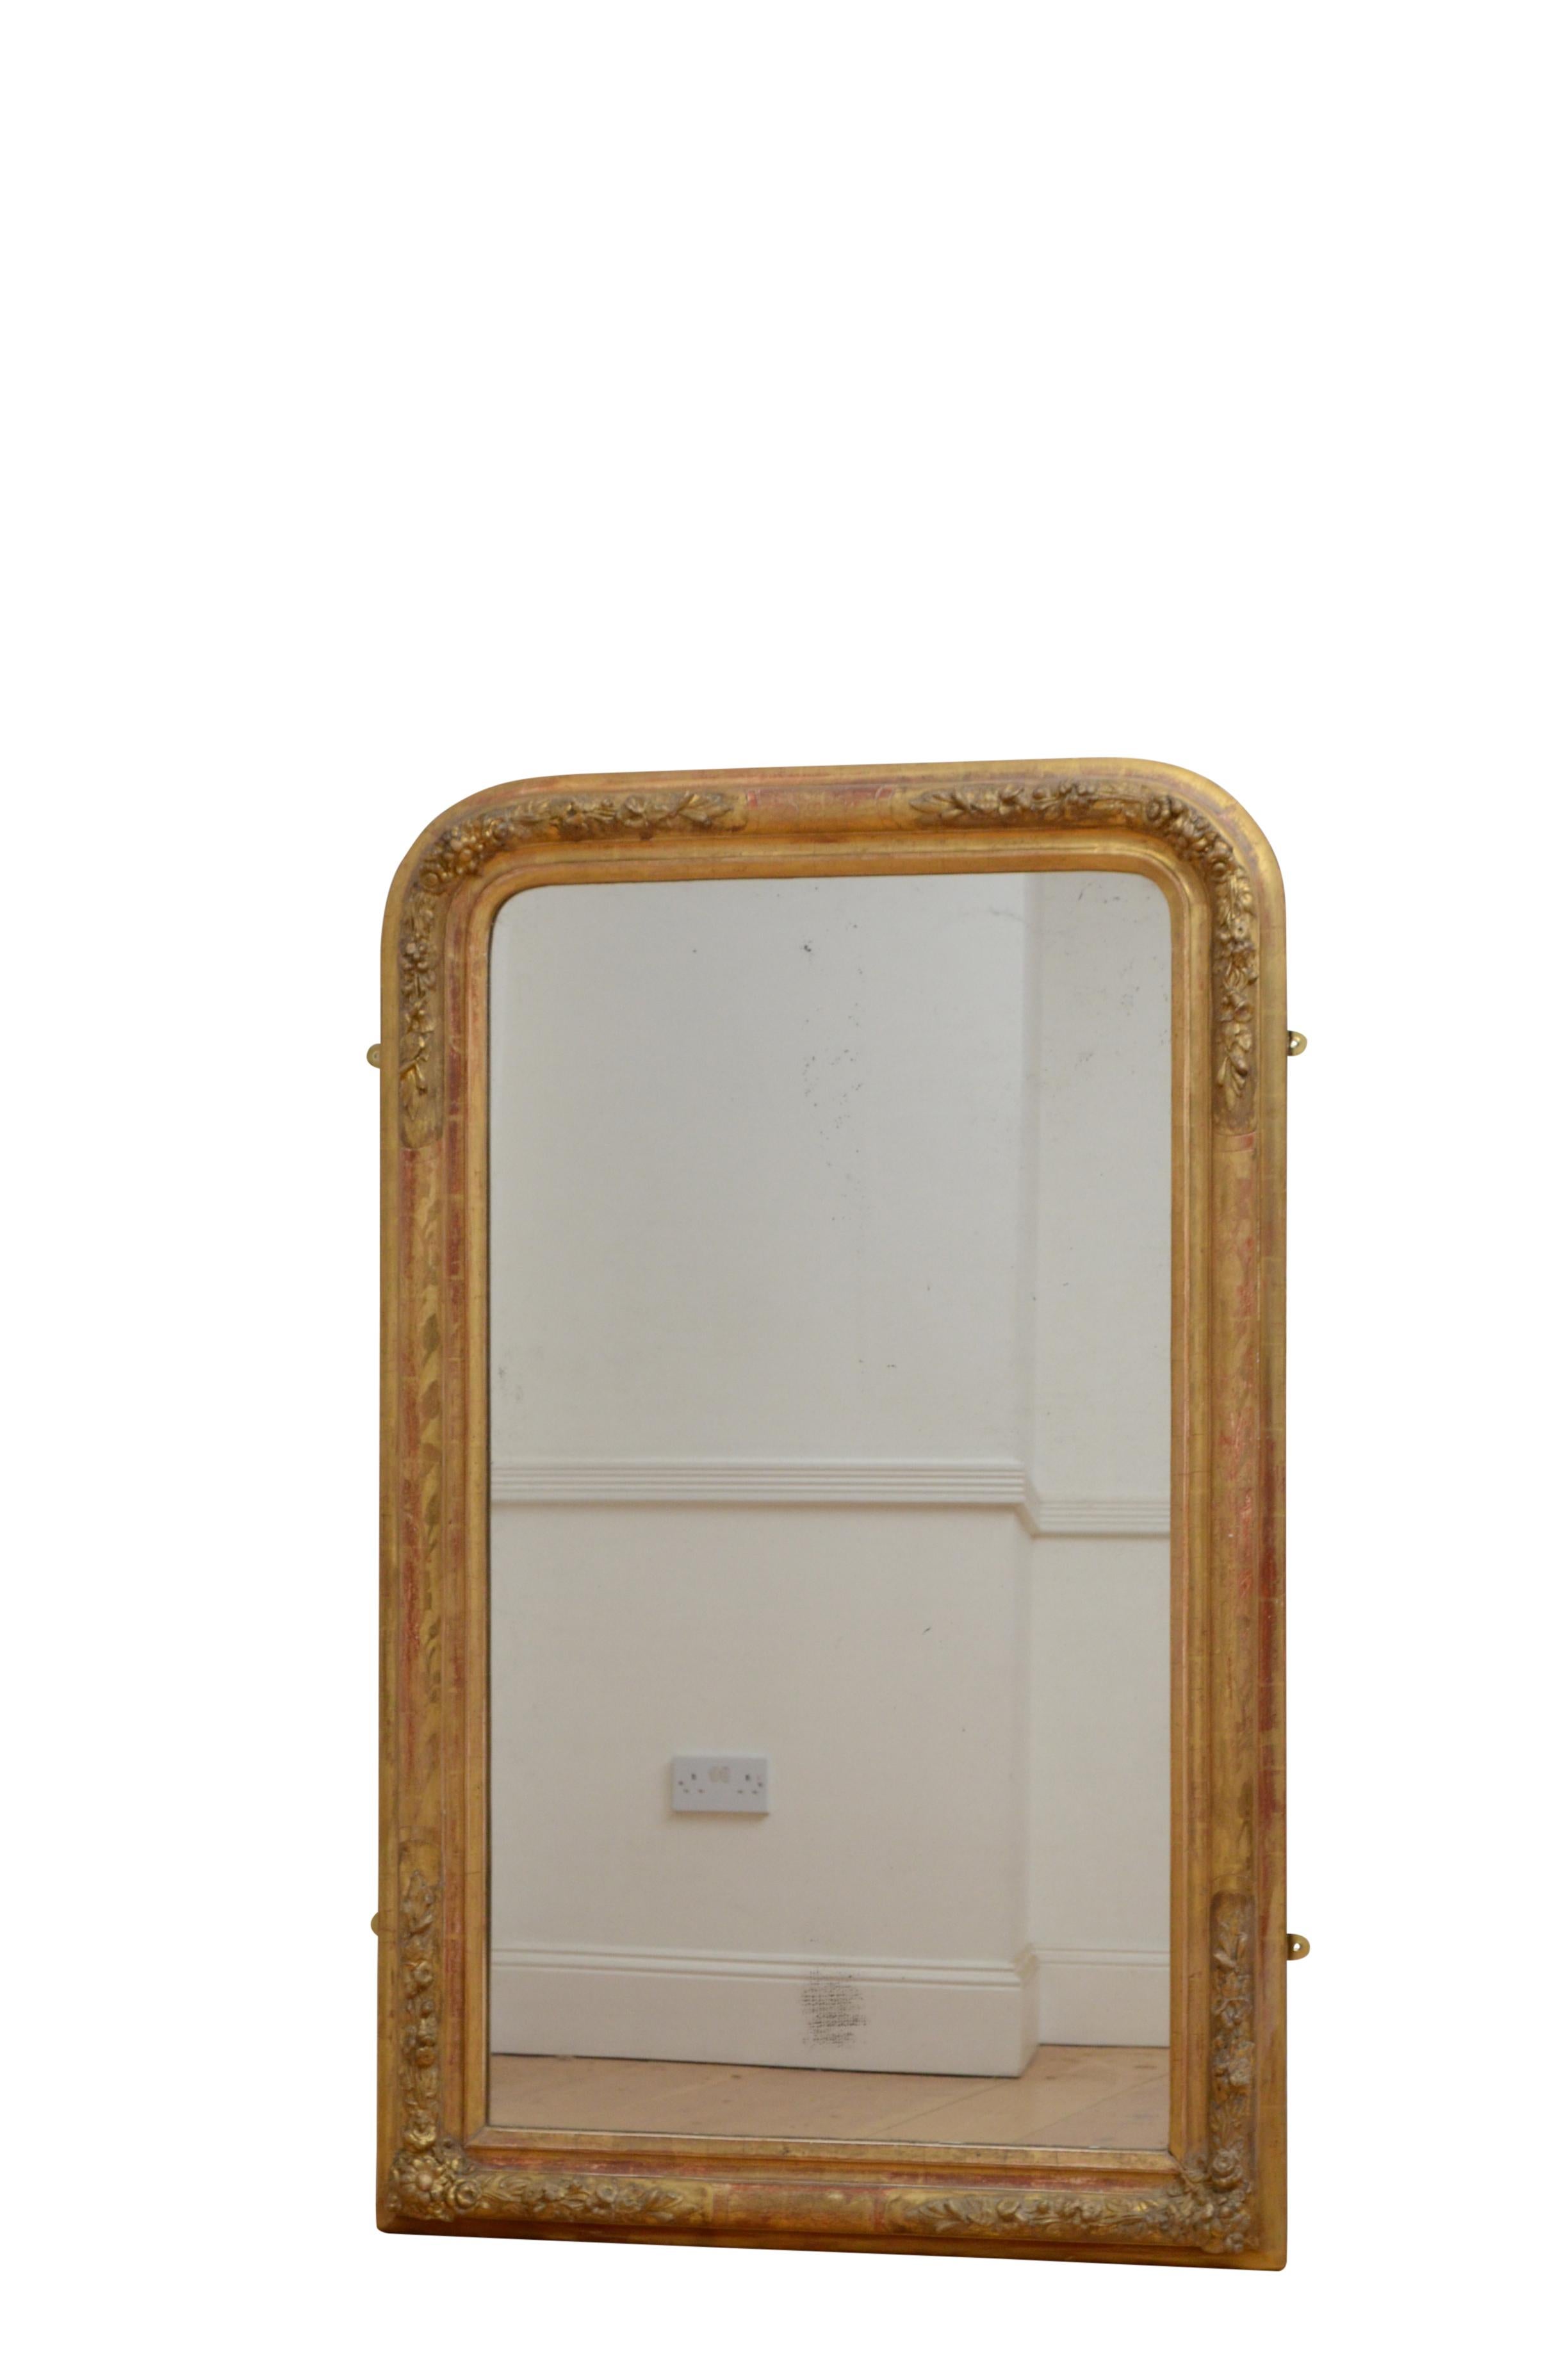 Fine XIXth century giltwood pier mirror, having original mercury glass with some foxing in gilded frame with carved floral decoration to corners and etchings throughout. This antique mirror retains its original glass with some foxing original gilt